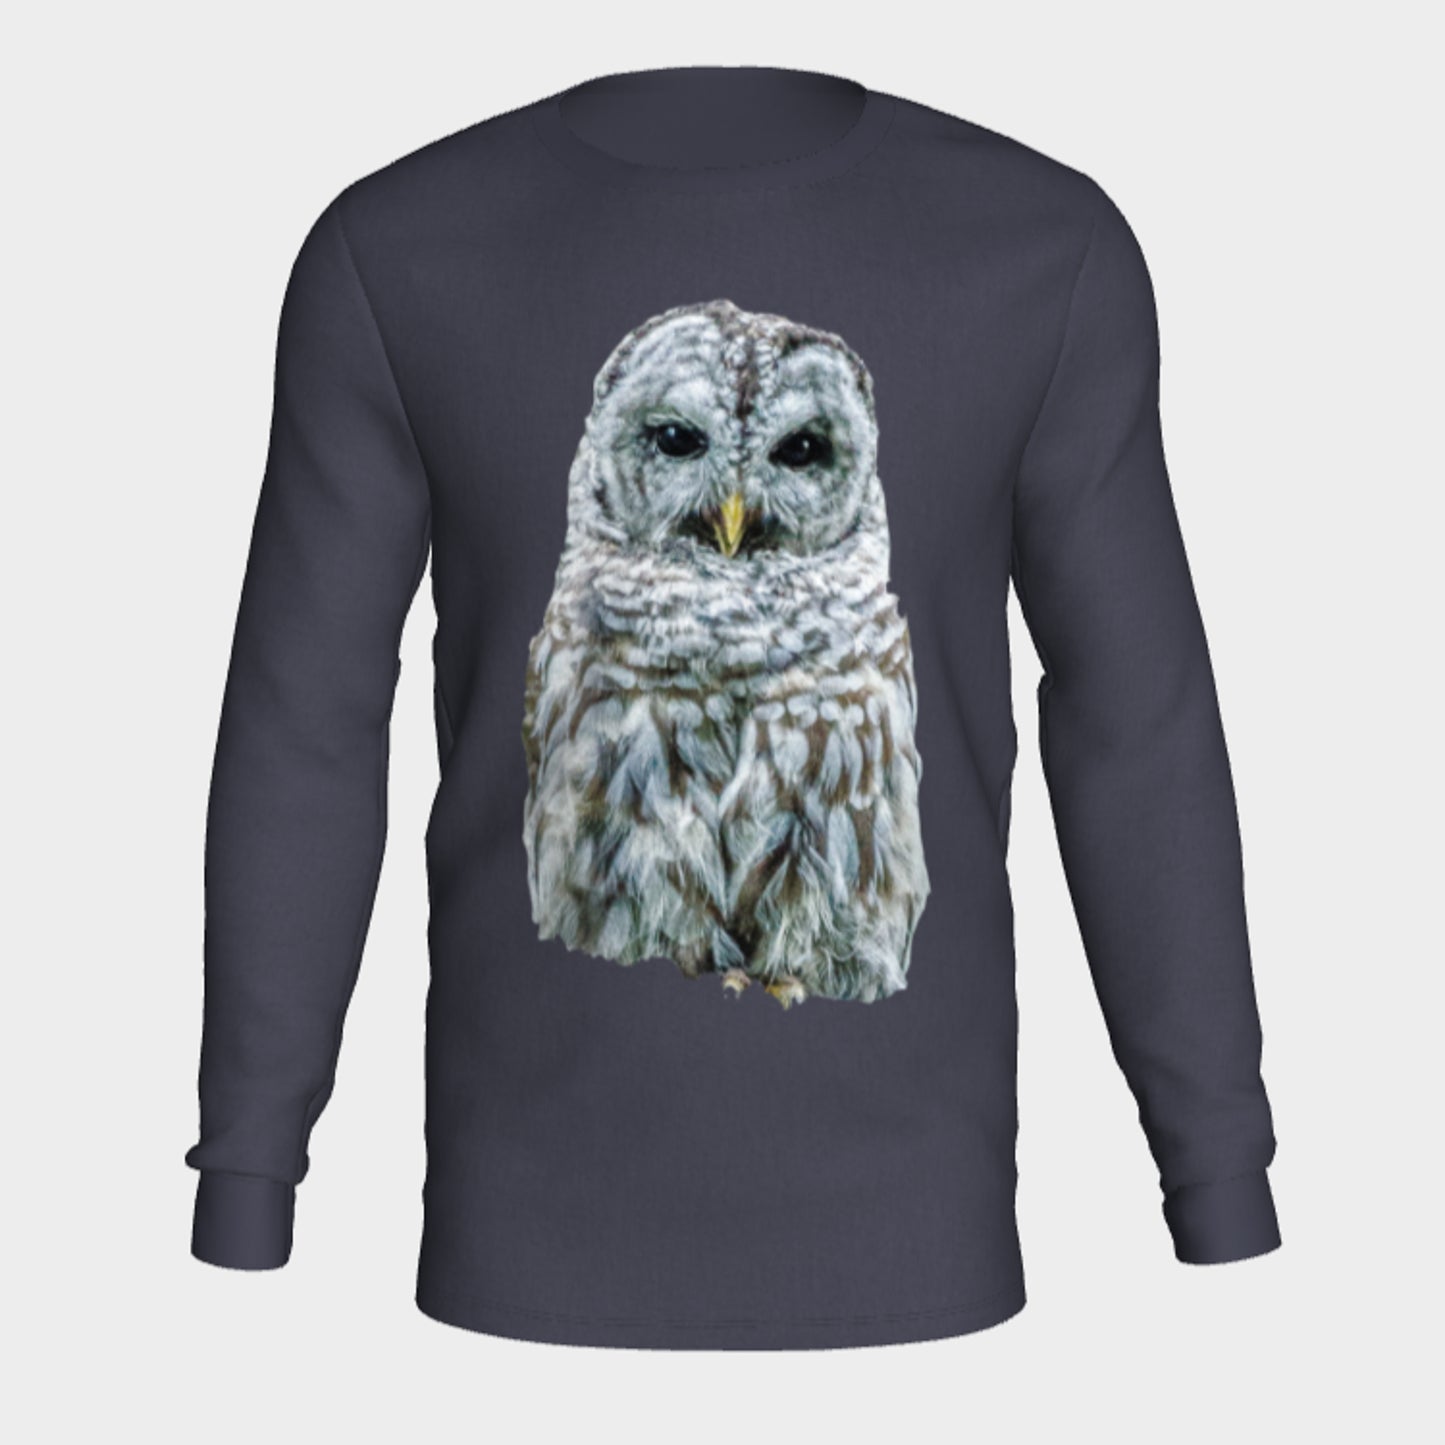 Wise Owl Long Sleeve Unisex T-Shirt Van Isle Goddess 100% cotton crew neck long sleeve super comfy tee is a must-have basic for any wardrobe.  Features:  Flattering unisex fit Cozy long sleeves Crew neck Made with Milltex lightweight fabric Sizes small to 2XL